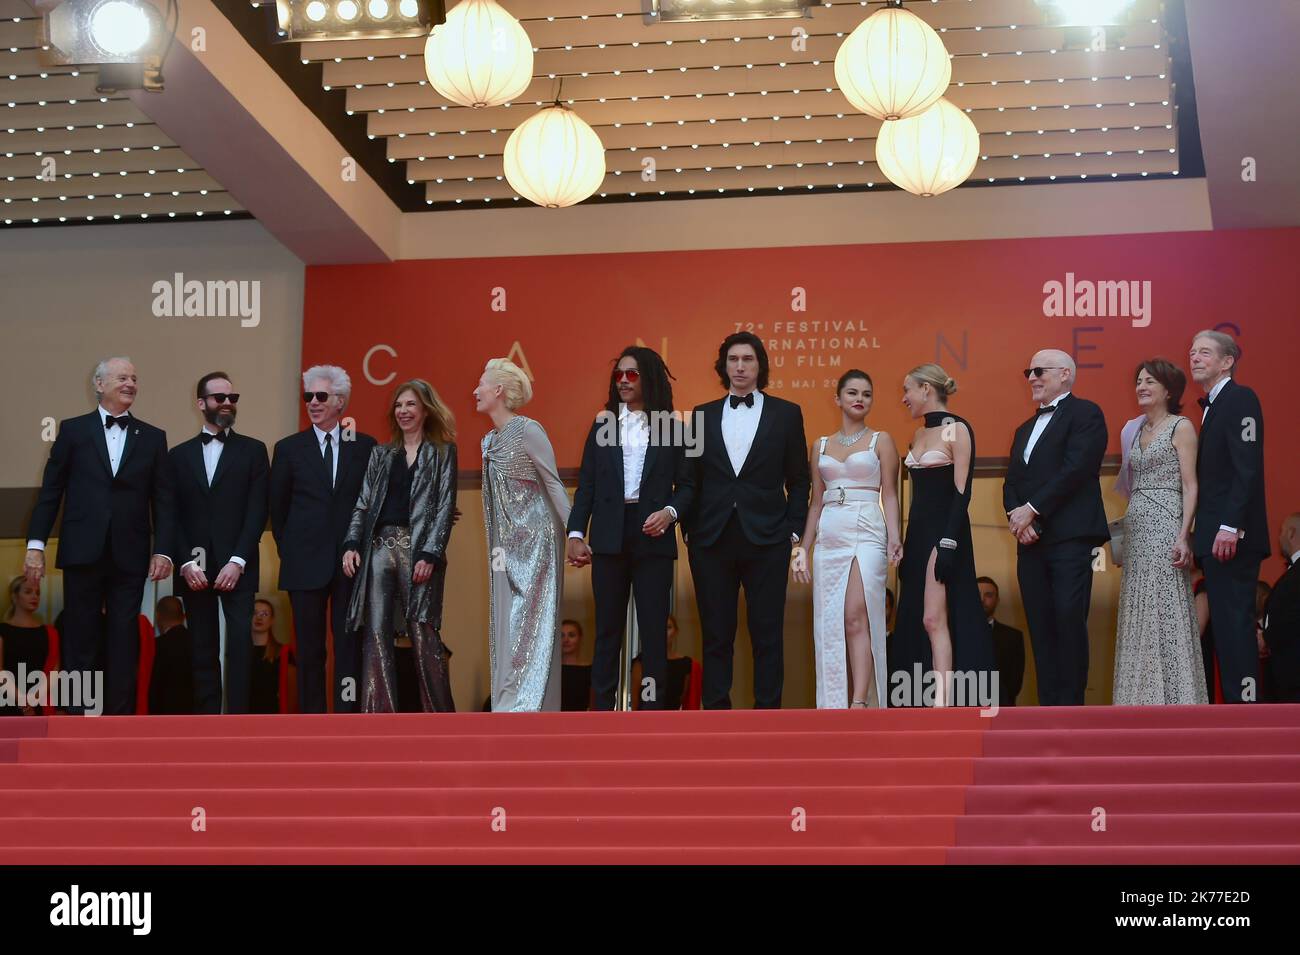 Joshua Astrachan Chloe Sevigny, Adam Driver, Jim Jarmusch, Sara Driver, Bill Murray, Selena Gomez, Luka Sabbat and Carter Logan attend the opening ceremony and screening of 'The Dead Don't Die' during the 72nd annual Cannes Film Festival on May 14, 2019 in Cannes, France. Stock Photo